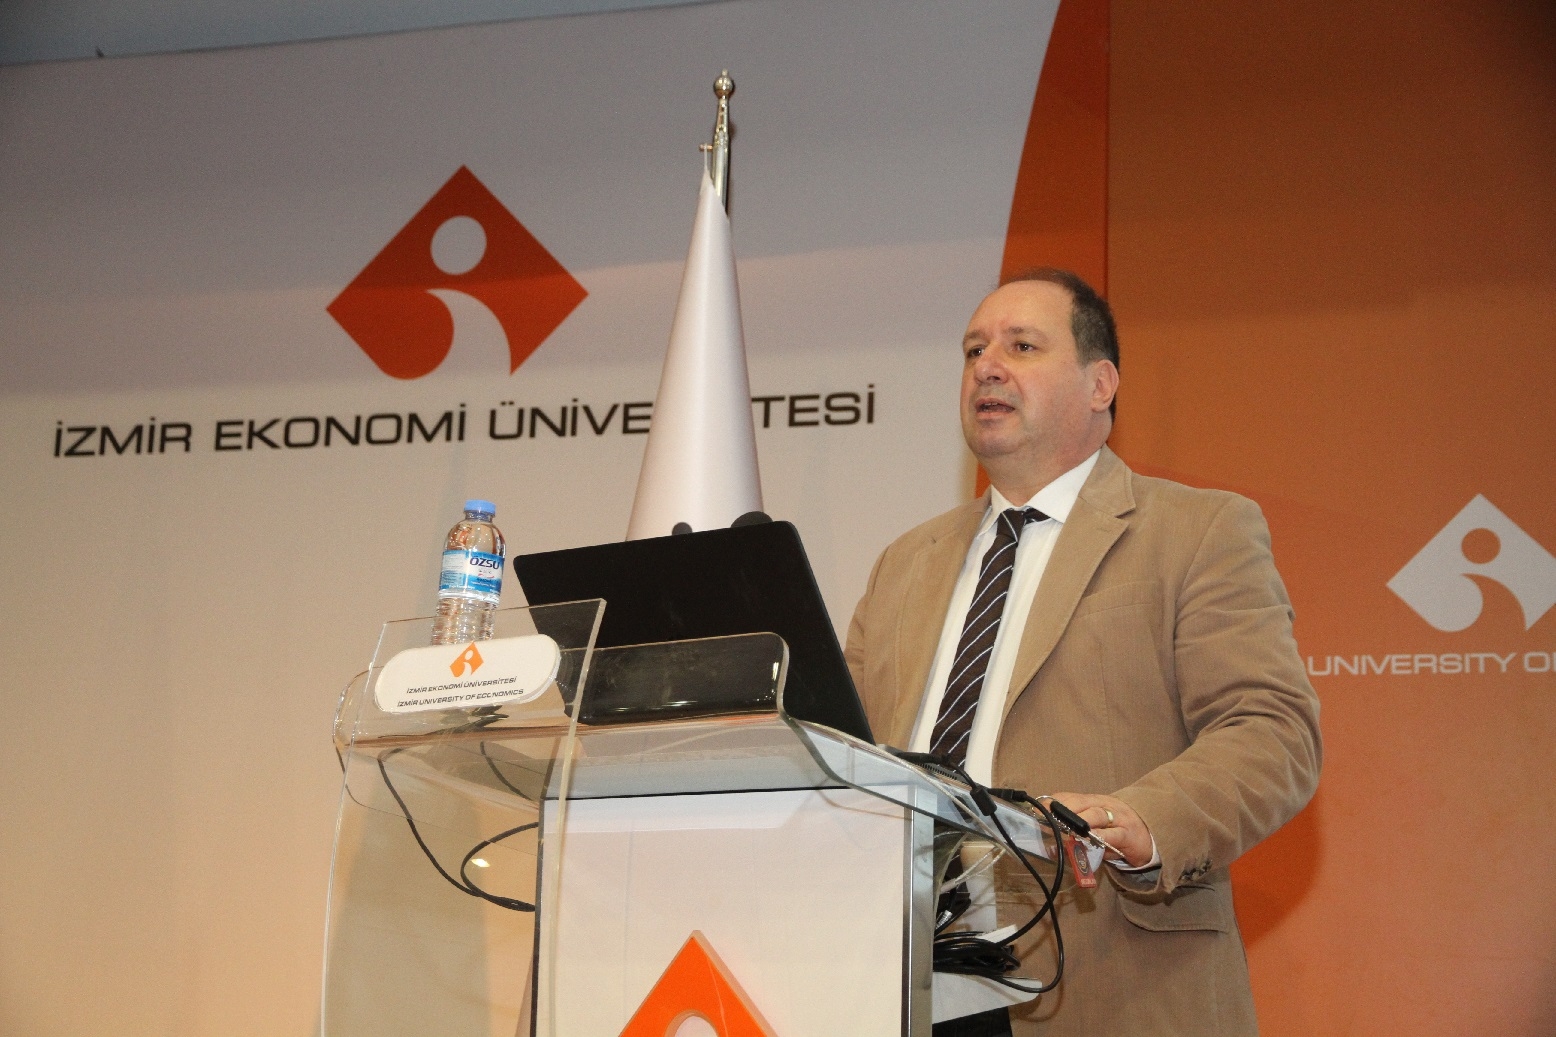 TUBITAK’S GOAL: QUALIFIED PEOPLE FOR QUALITY SCIENCE 